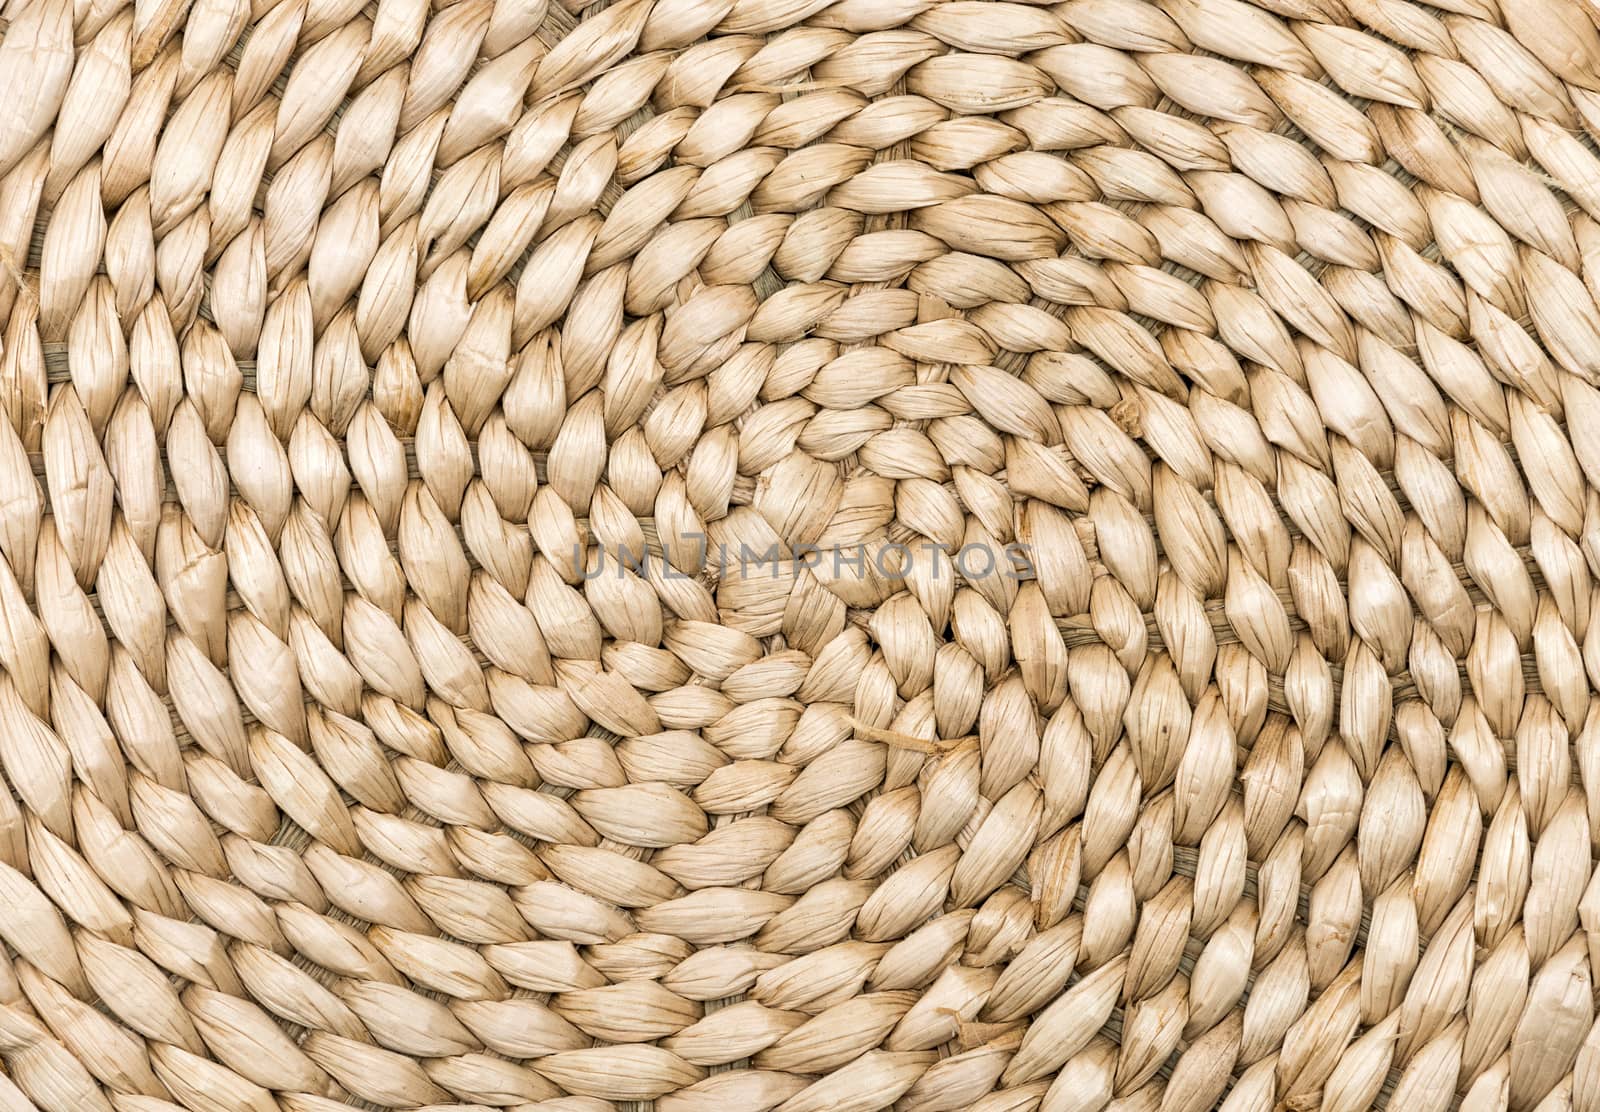 Wicker texture has made. circle by DNKSTUDIO